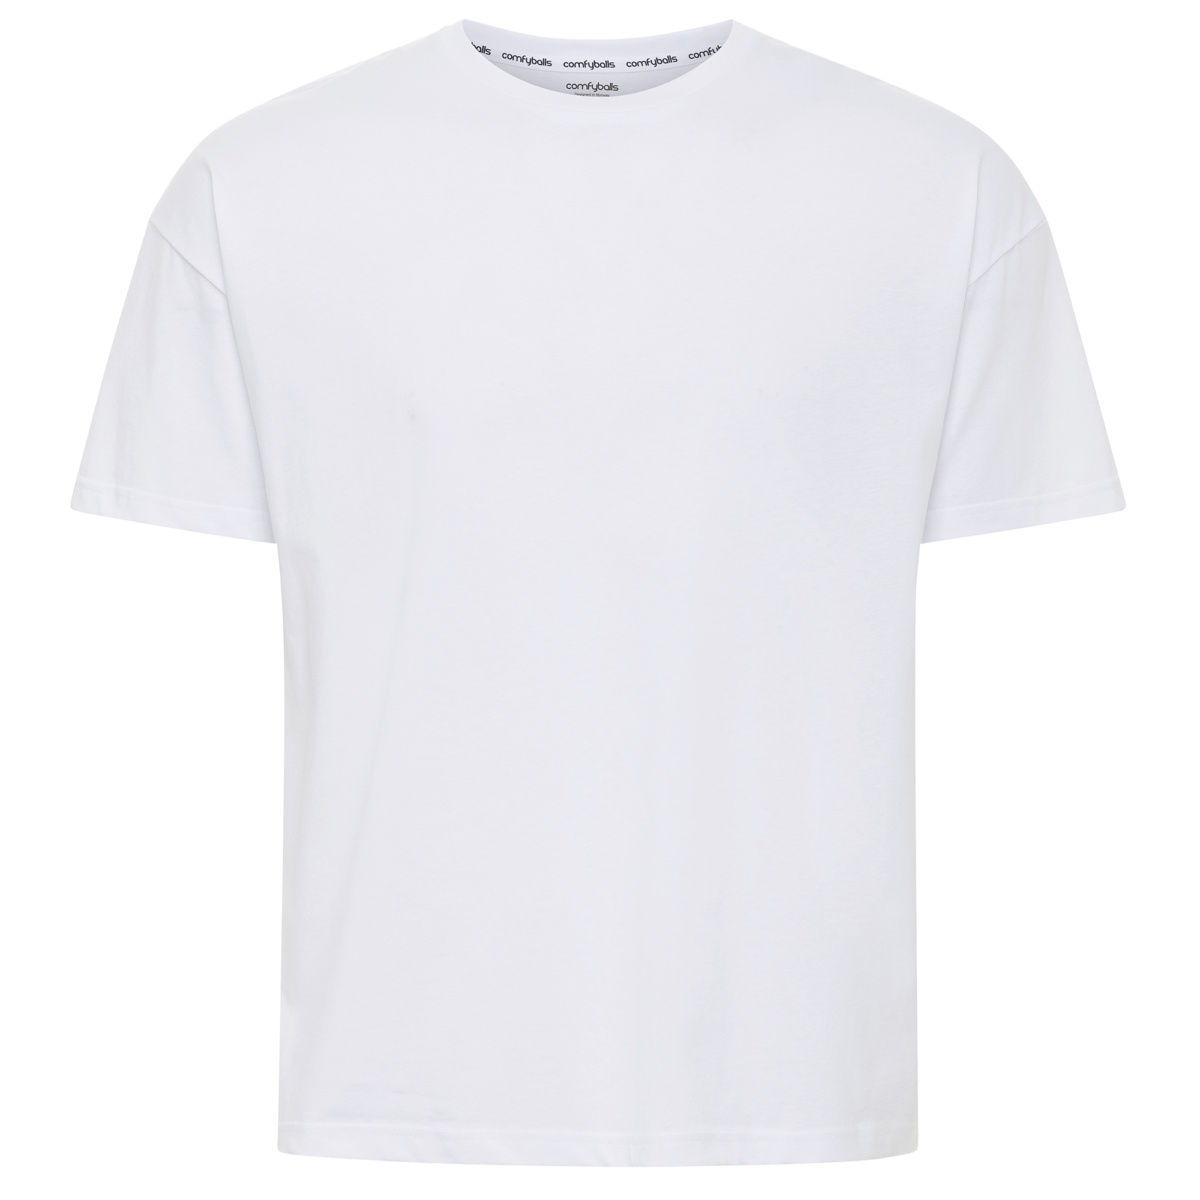 Comfy White Oversize Tee